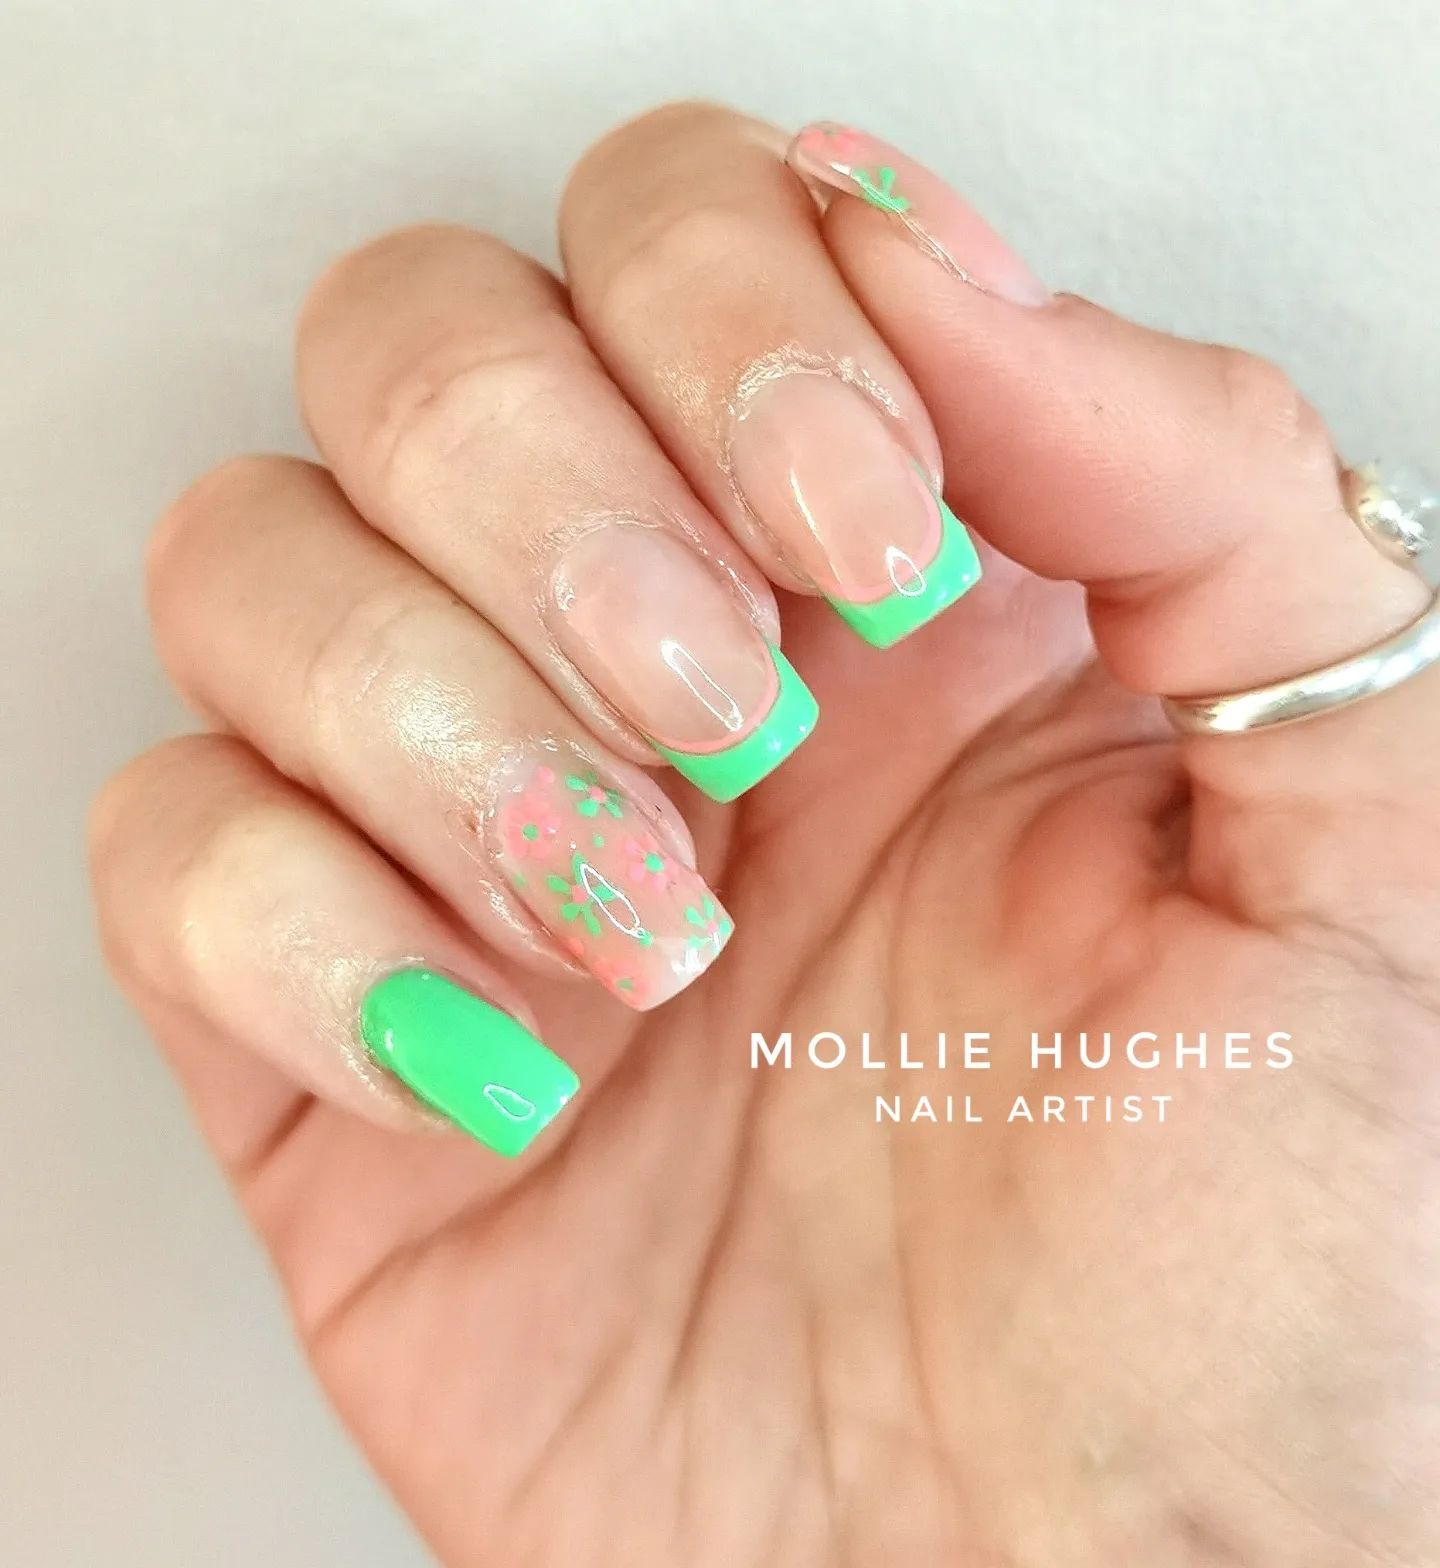 Mint green and French nails look mesmerizing when paired together. You’ll like this French mani the most for the summer season.